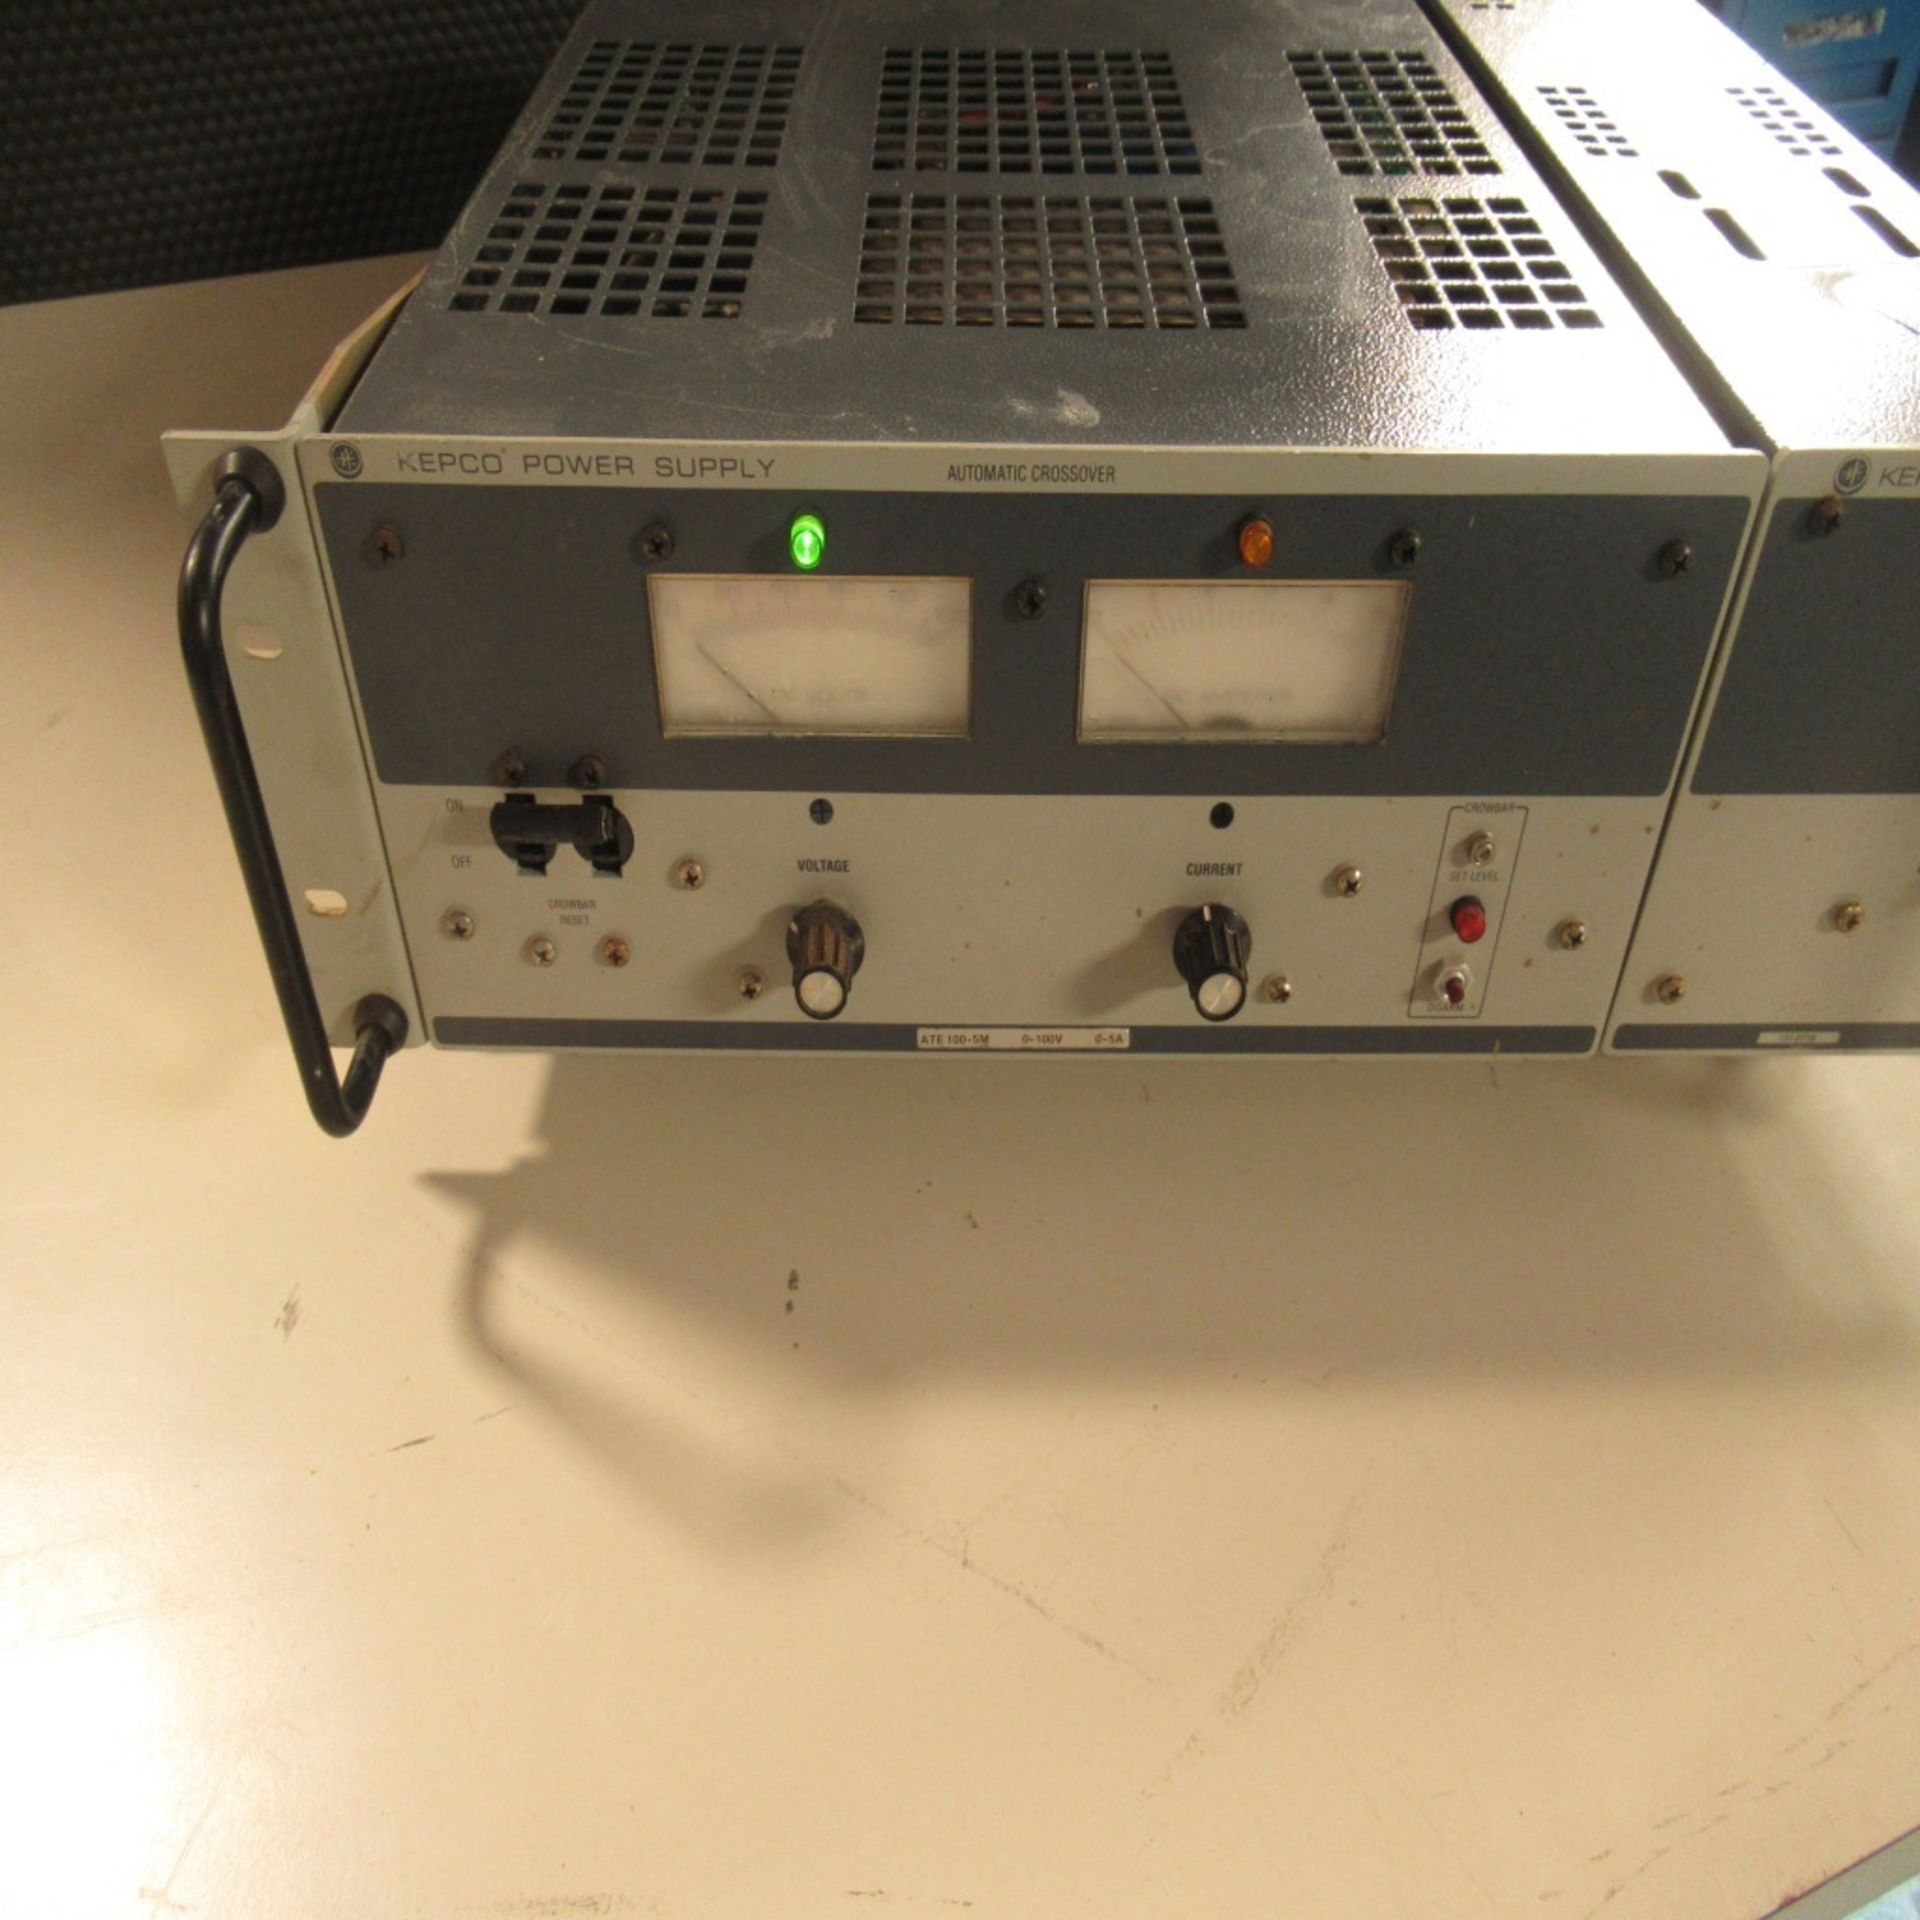 PHOTON SNAP SHOT MODEL 6000 *POWERS ON* NO SCREEN DISPLAY; FARNELL AP20-80 REGULATED POWER SUPPLY * - Image 35 of 222